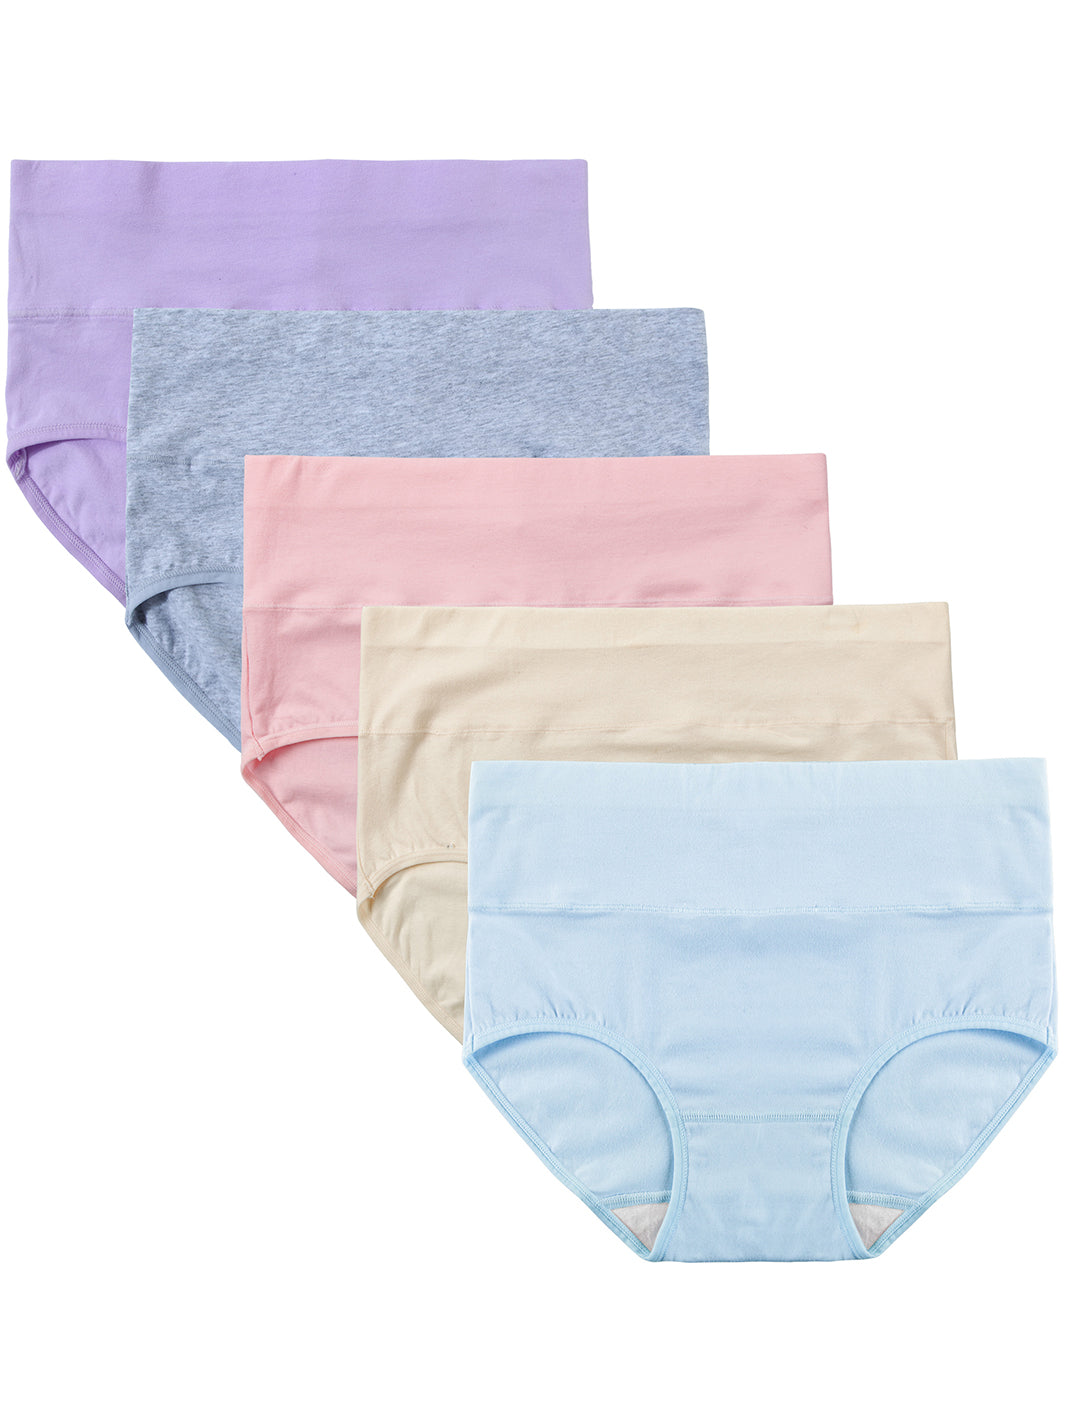 Innersy + INNERSY High Cut Tummy Control Cotton Underpants